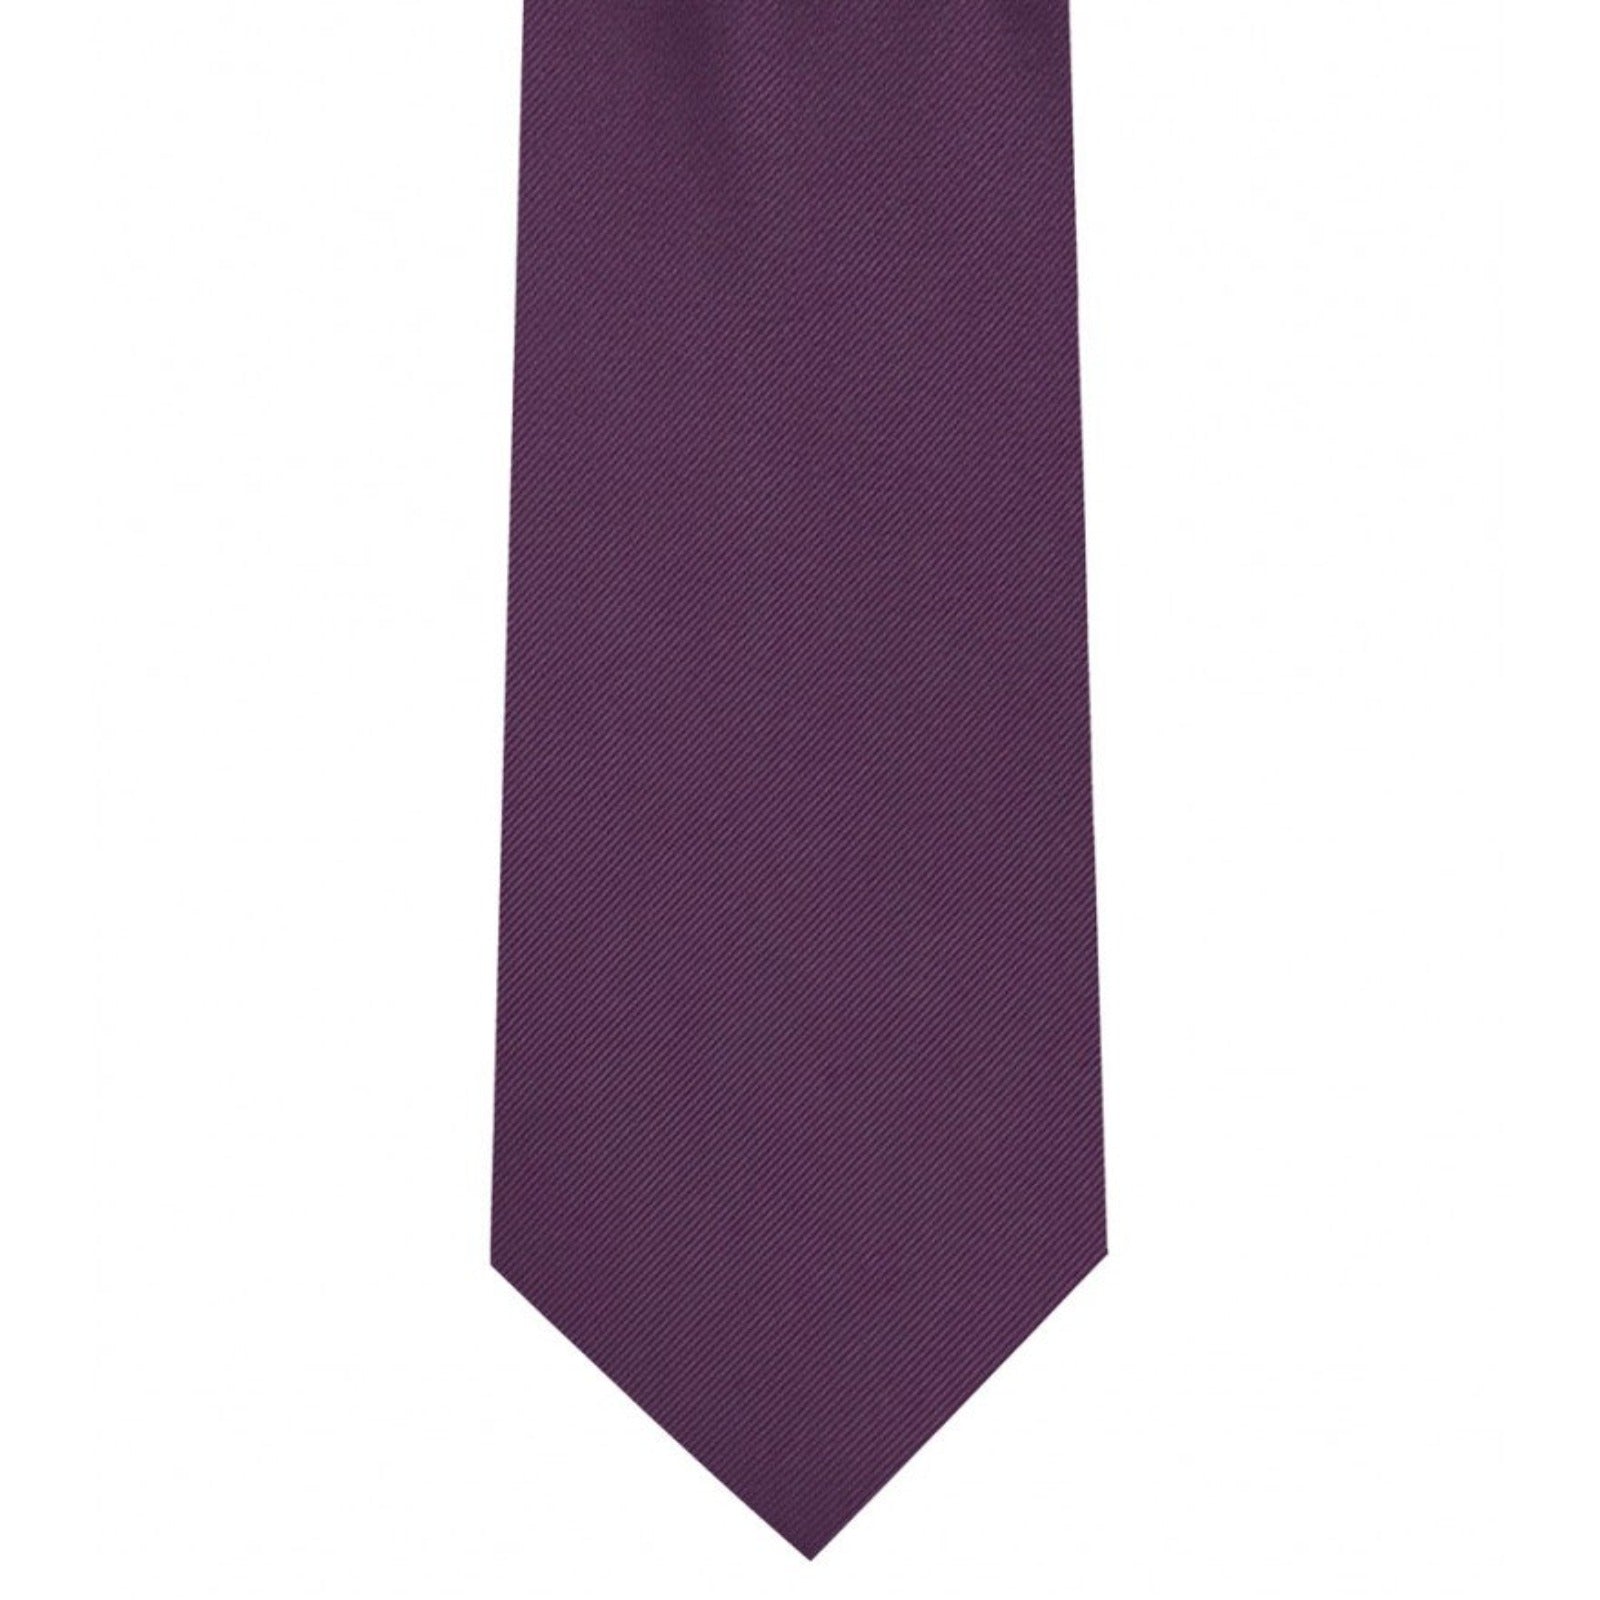 Classic Plum Tie Ultra Skinny tie width 2.25 inches With Matching Pocket Square | KCT Menswear